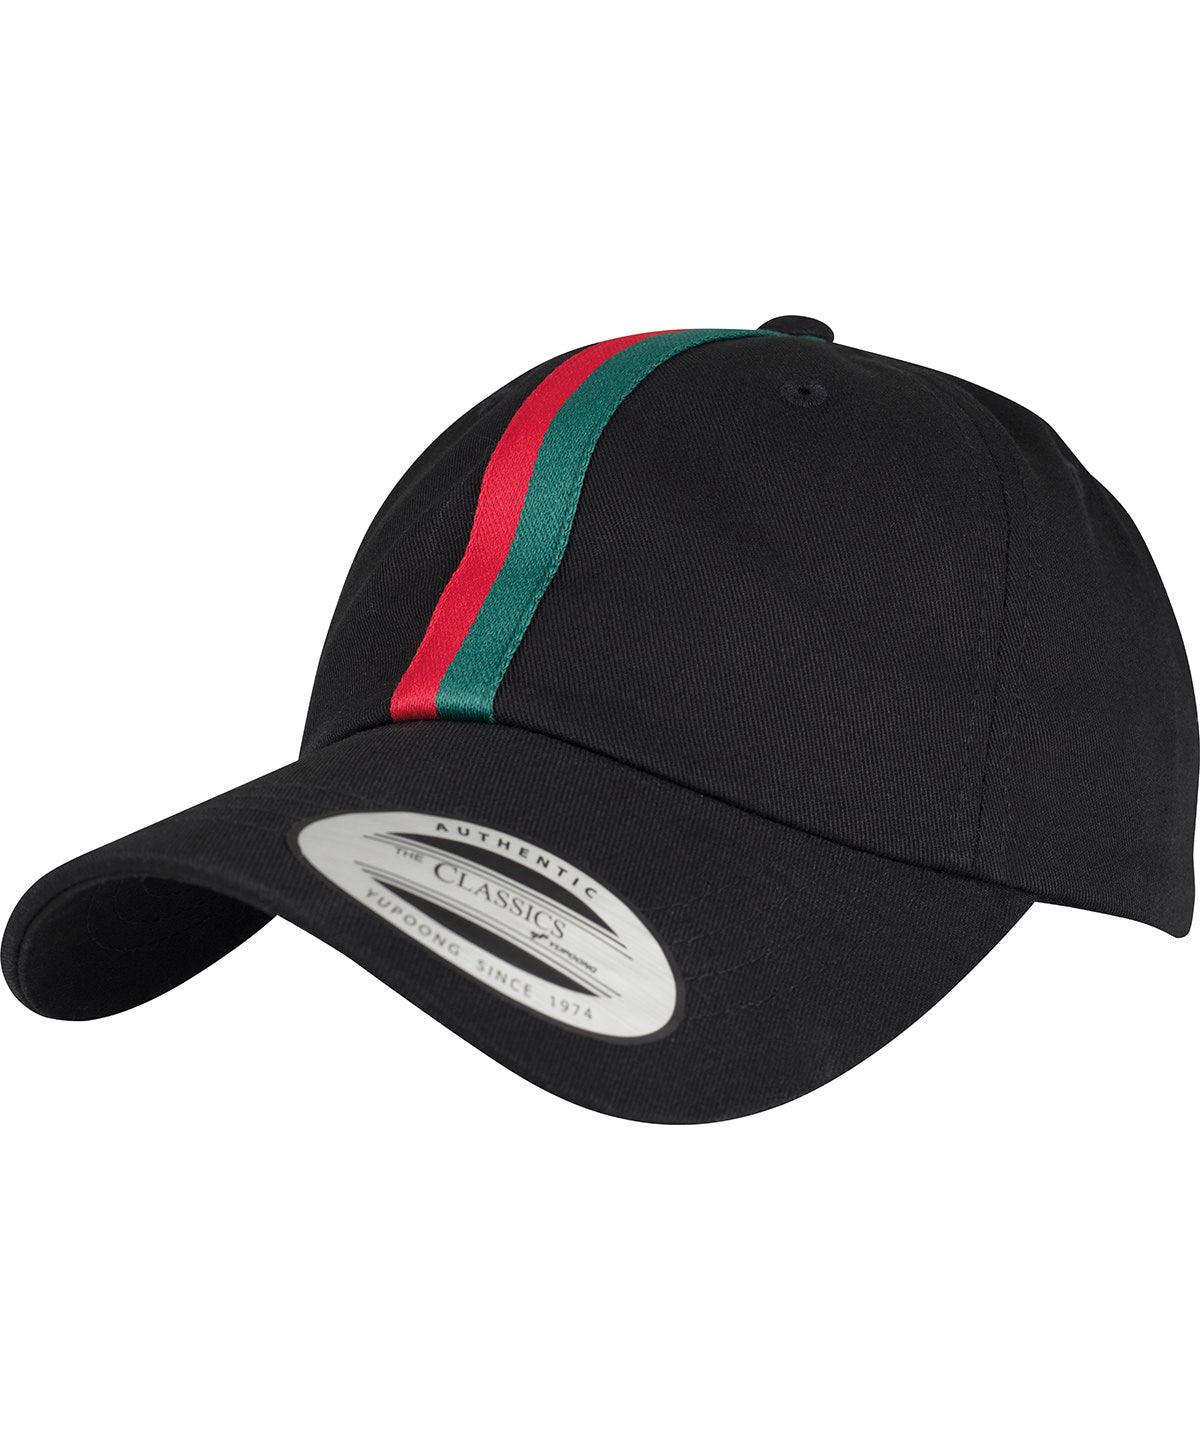 White/Fire Red/Green | hat Centres dad - Stripe (6245DS) Schoolwear